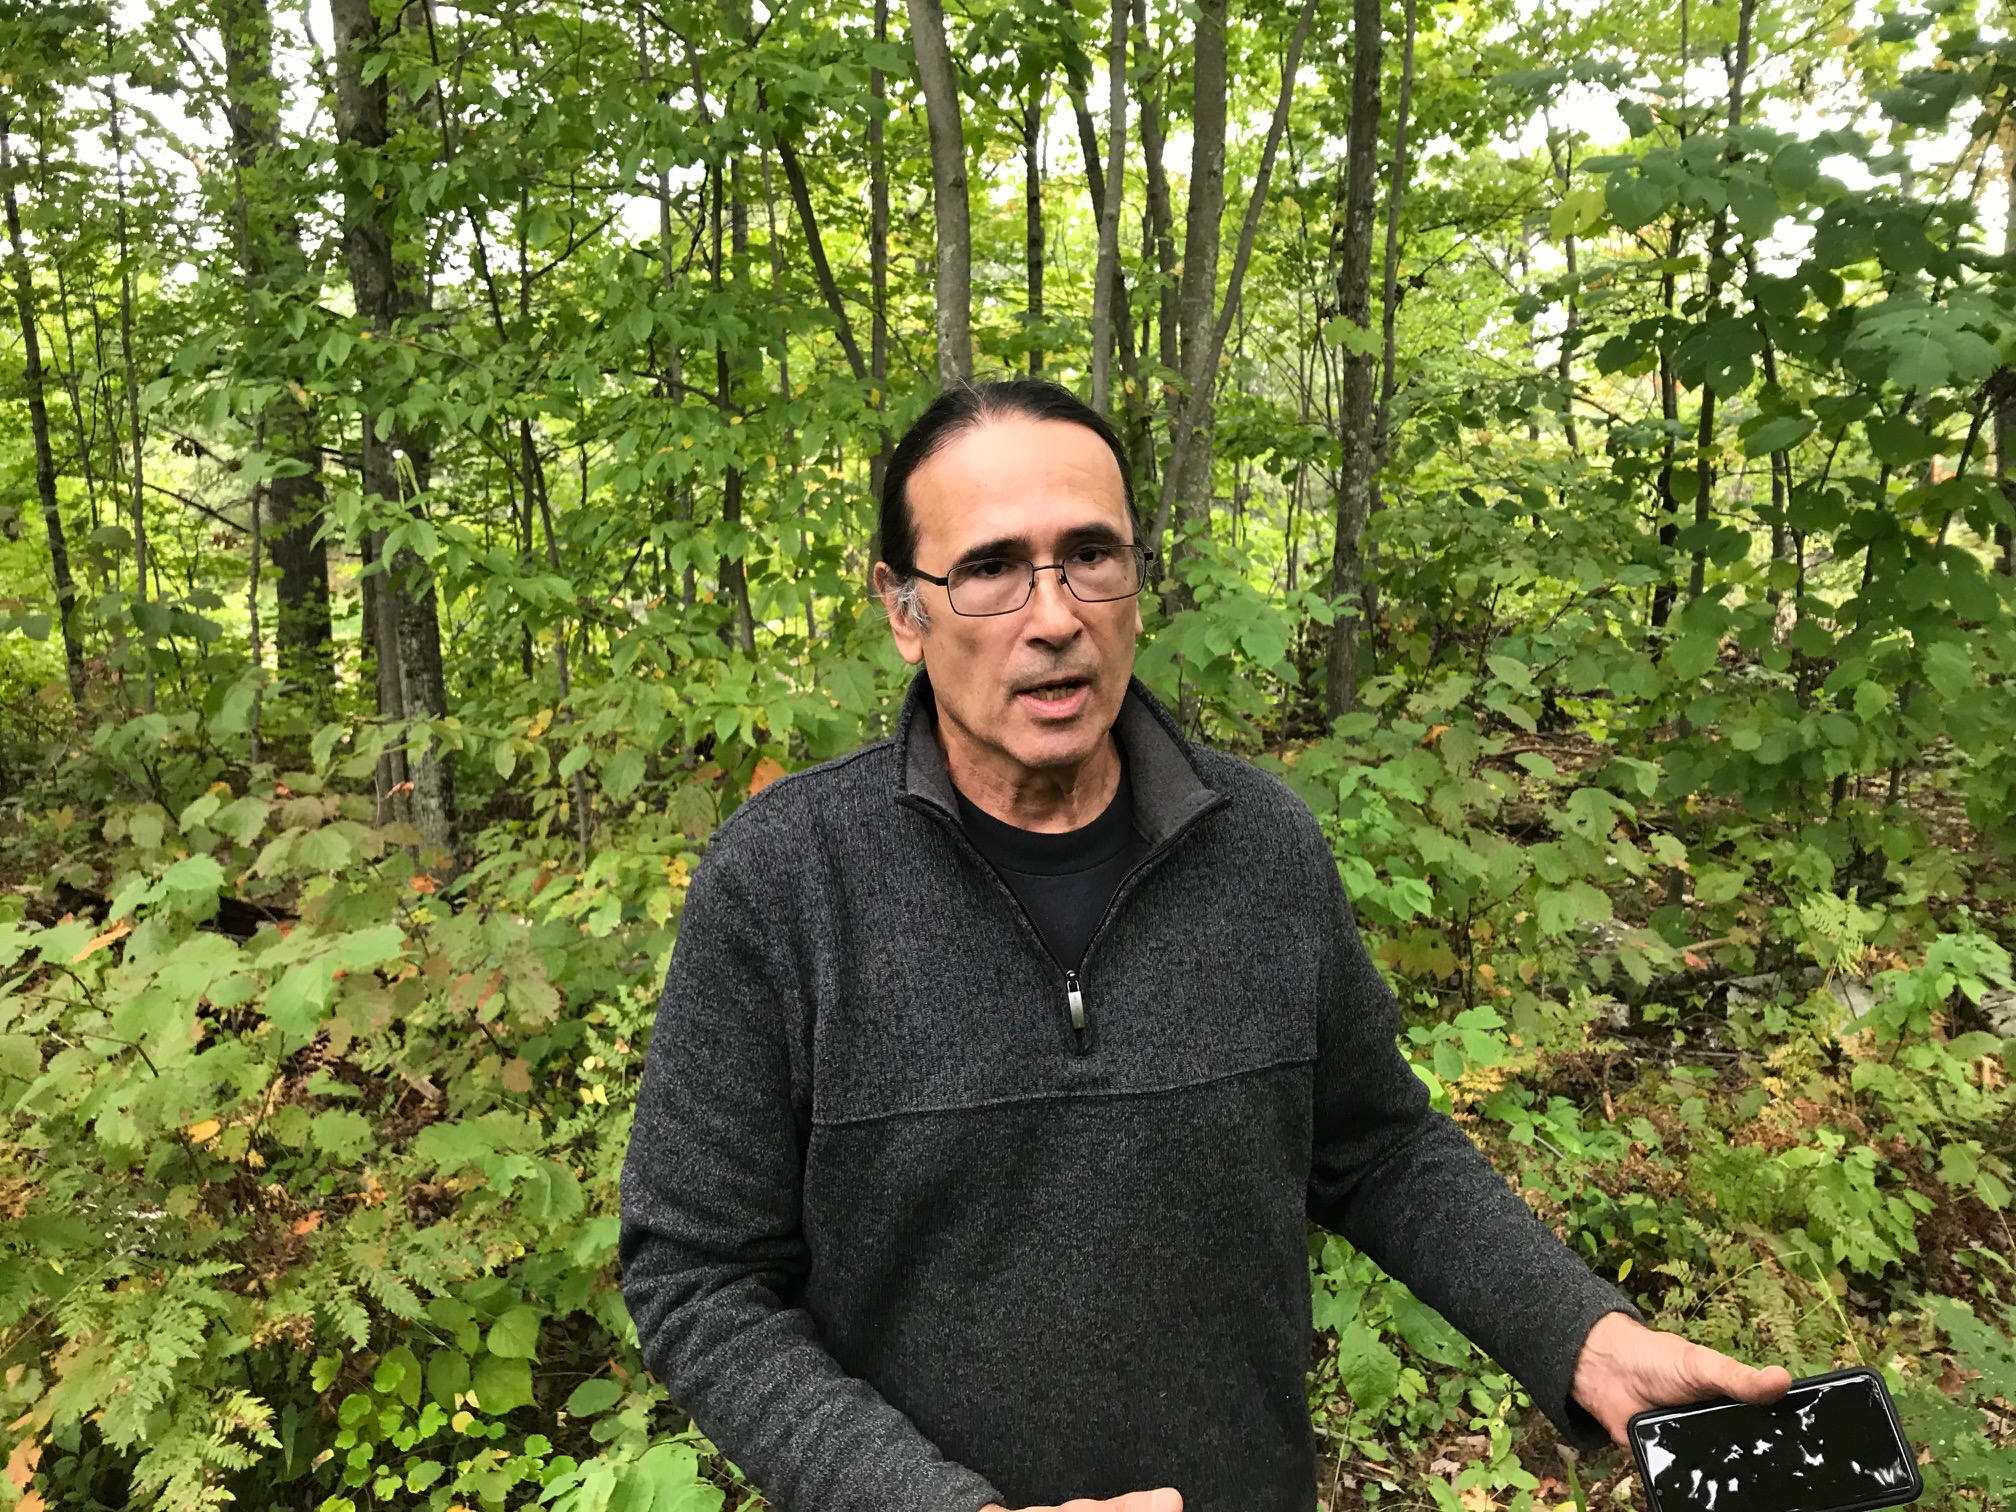 Paul DeMain on his land on the Lac Courte Oreilles reservation.